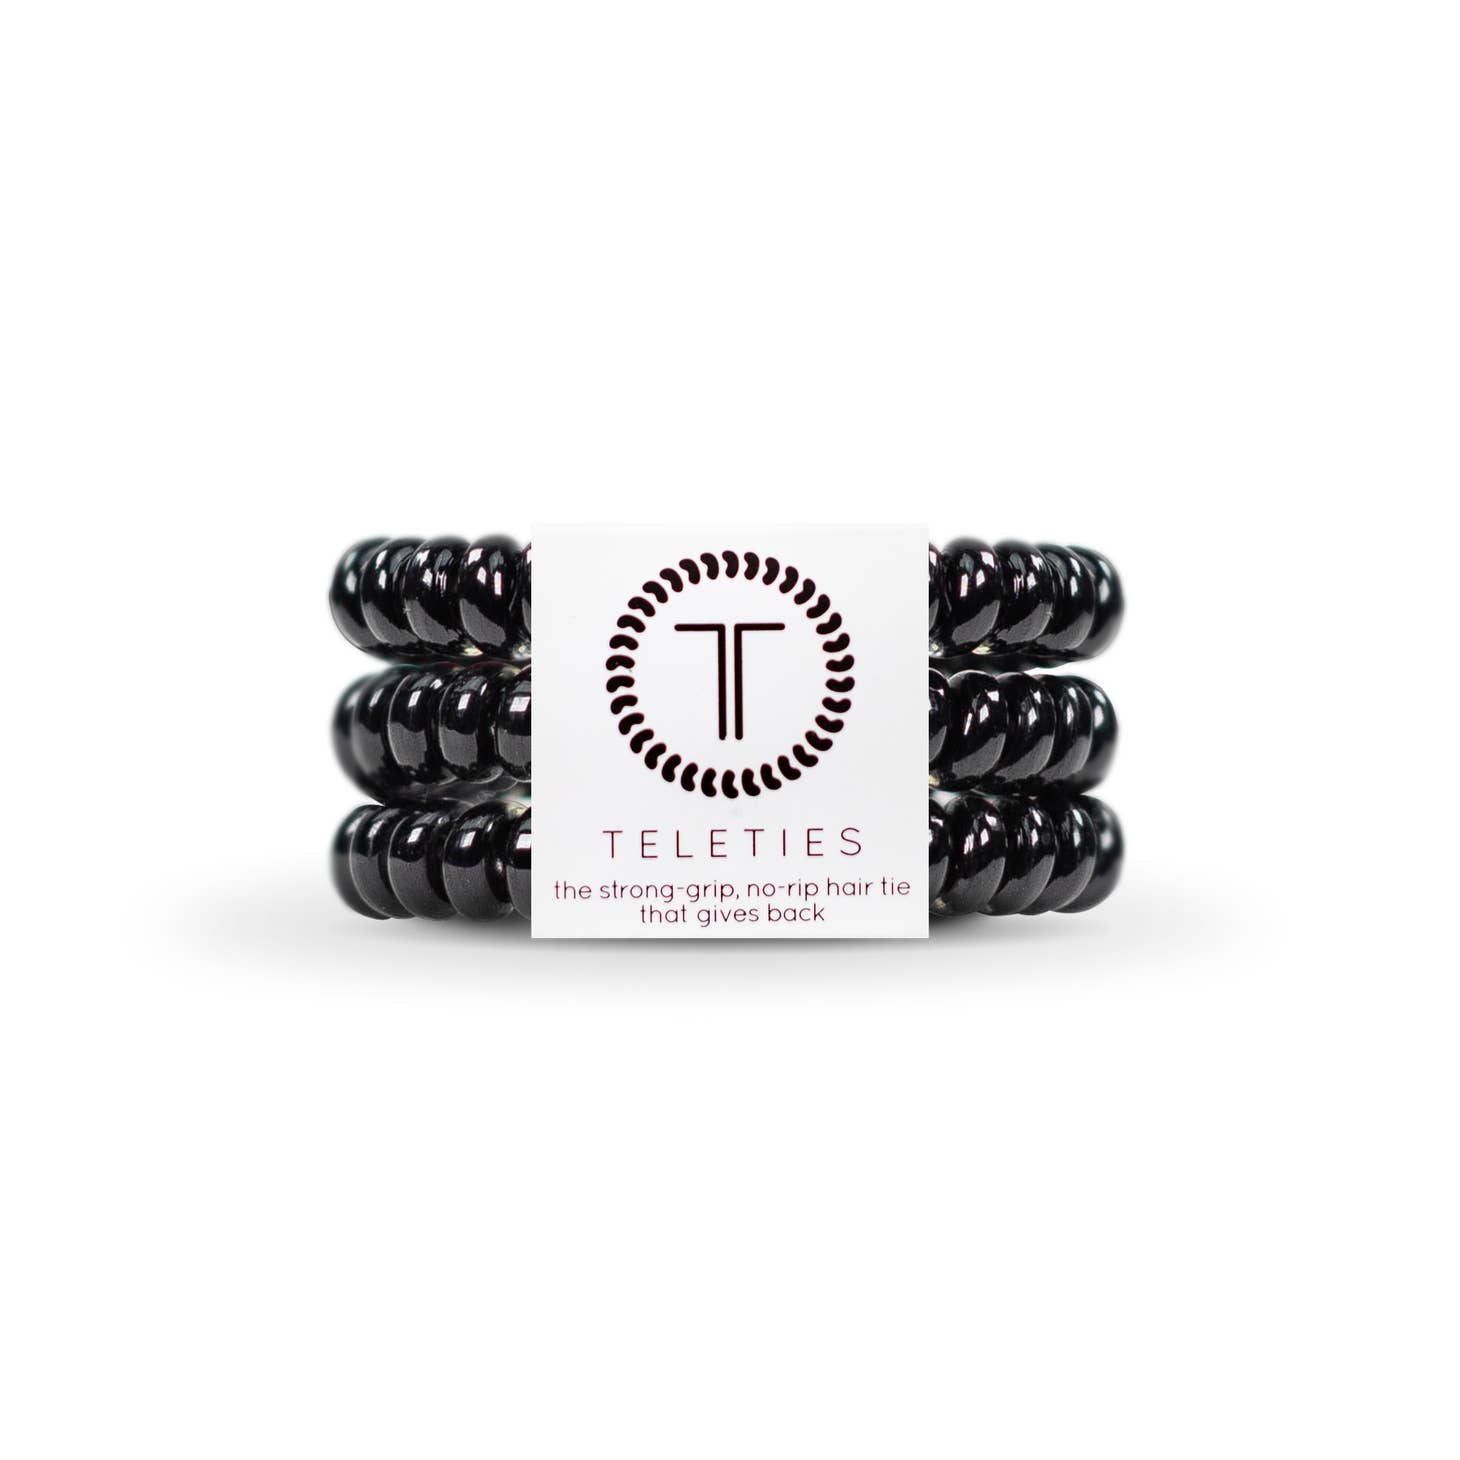 Hold your hair and enhance your style with TELETIES. The strong grip, no rip hair ties that double as a bracelet. Strong, pretty and stylish, TELETIES are designed to withstand everyday demands while taking your look to the next level. Sold in packs of three.  The small size is 4.5cm wide x 0.5cm thick jet black color